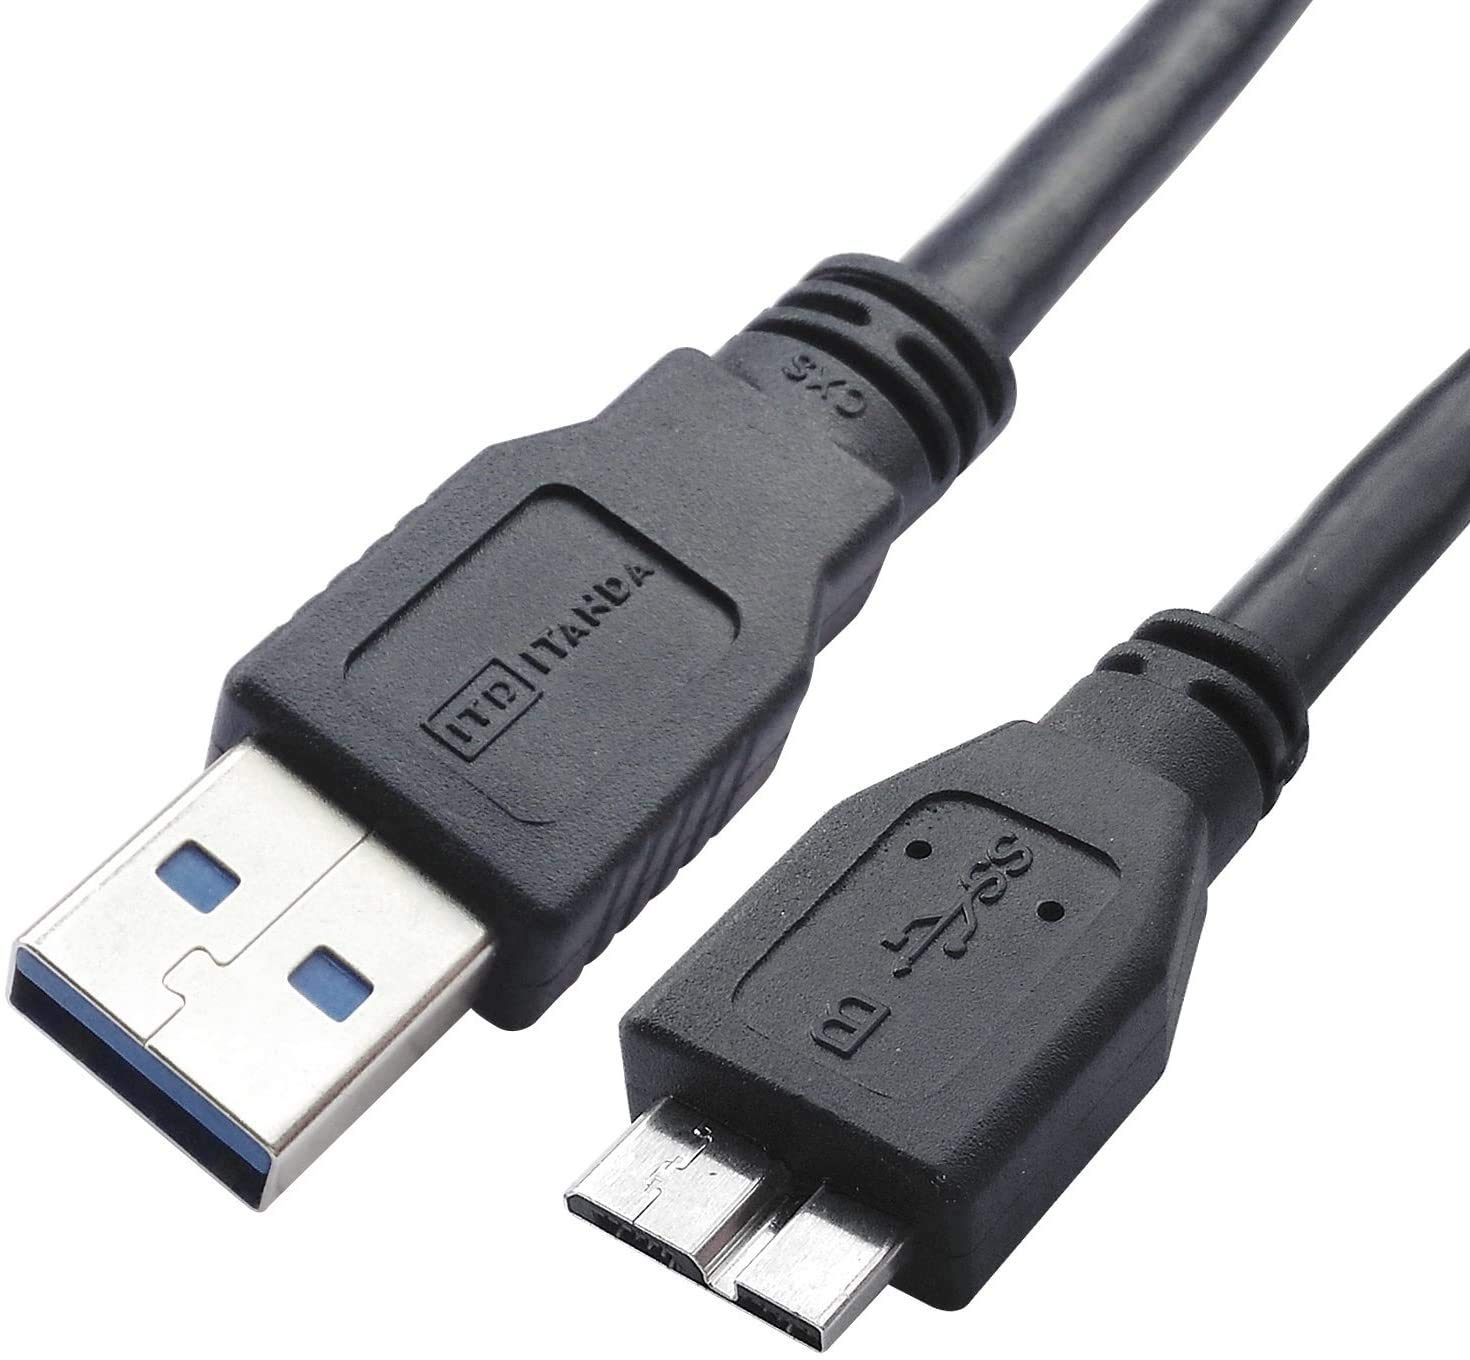 External hard drive cable